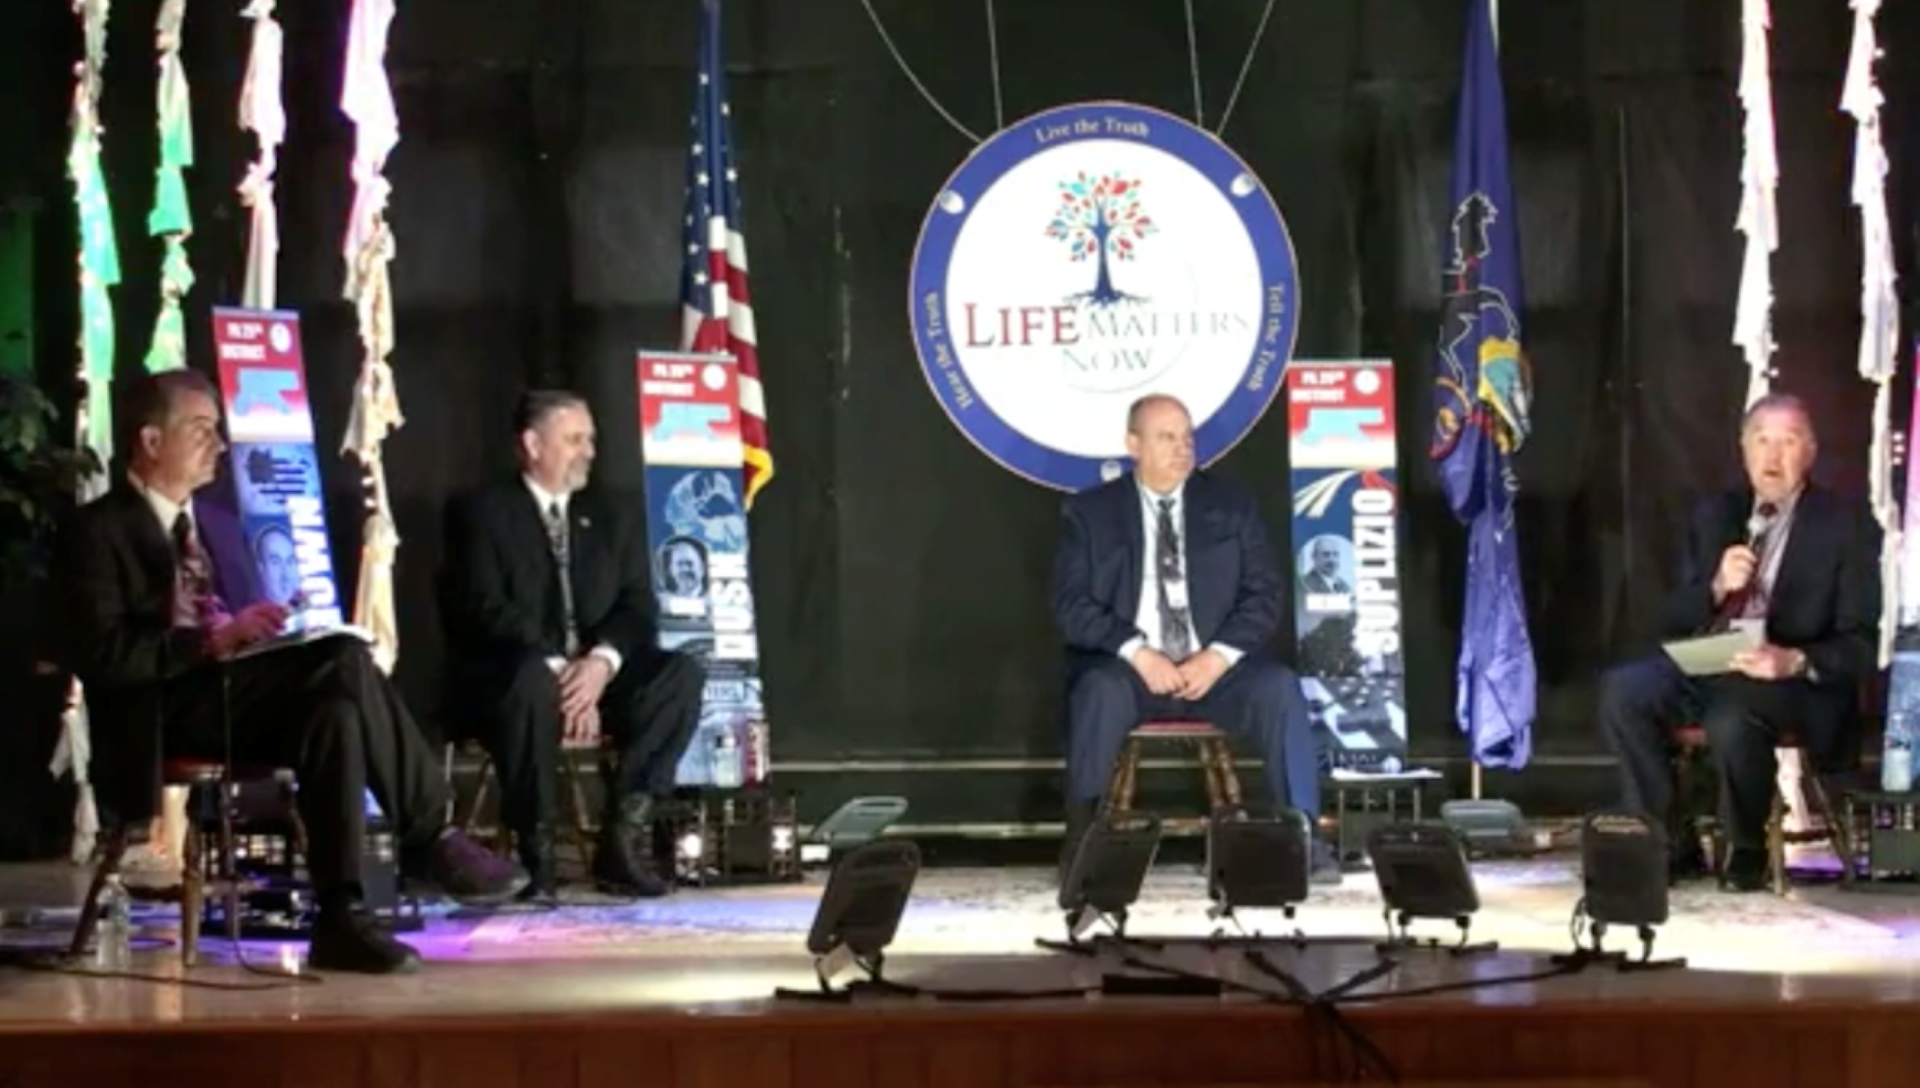 Candidates for the 25th State Senate District, (left to right) Jim Brown, Cris Dush, and John "Herm" Suplizio. Tom Wagner (far right) moderated the event.